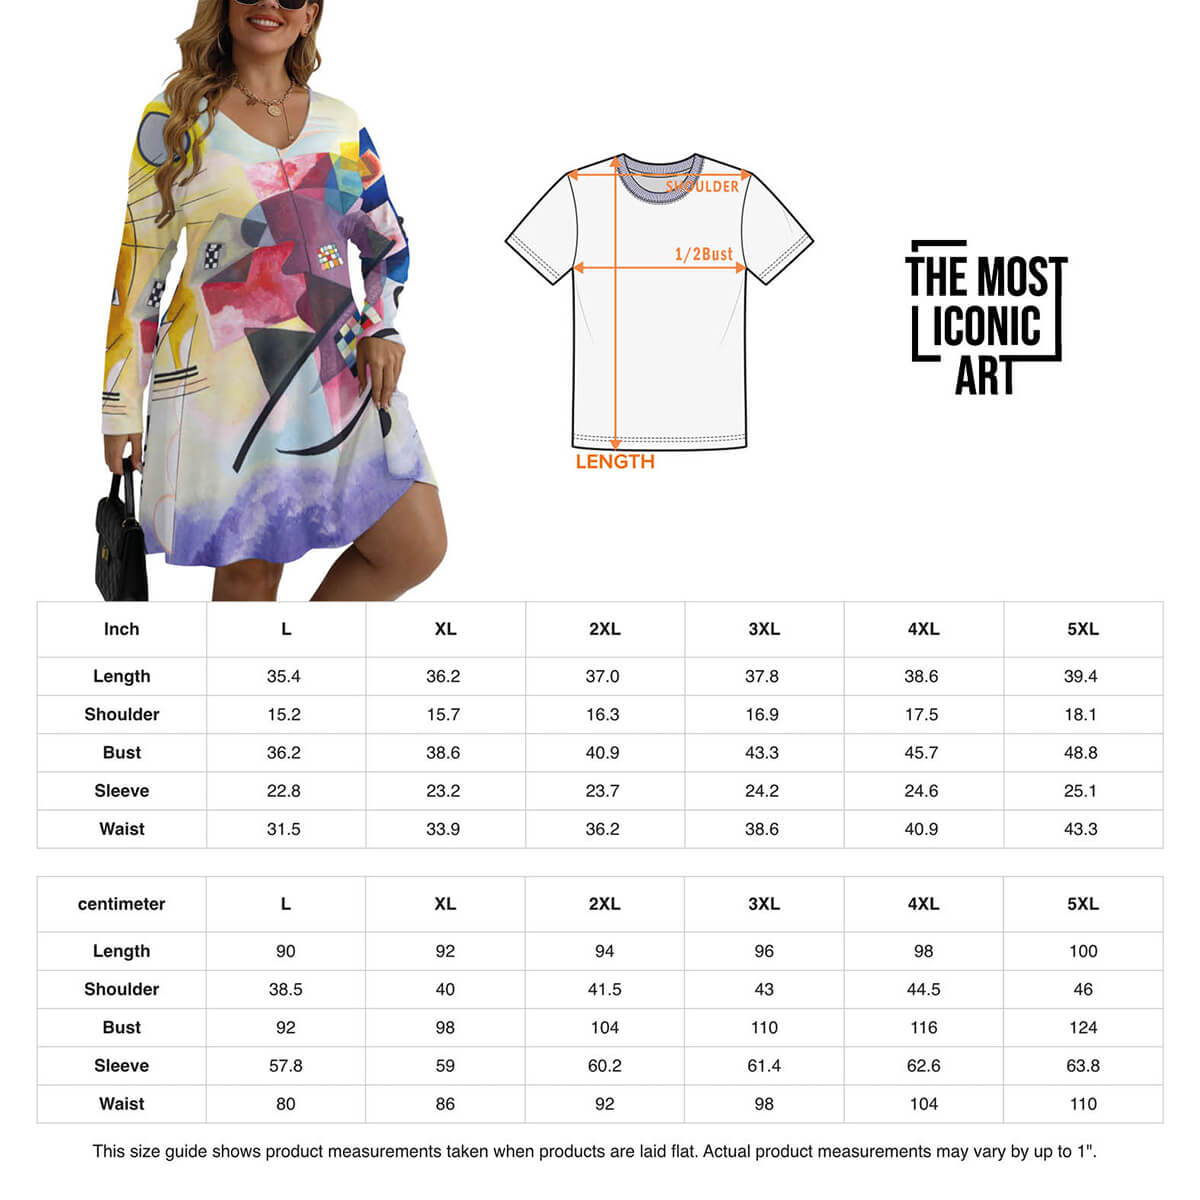 Colorful artistic clothing for fashion-forward individuals